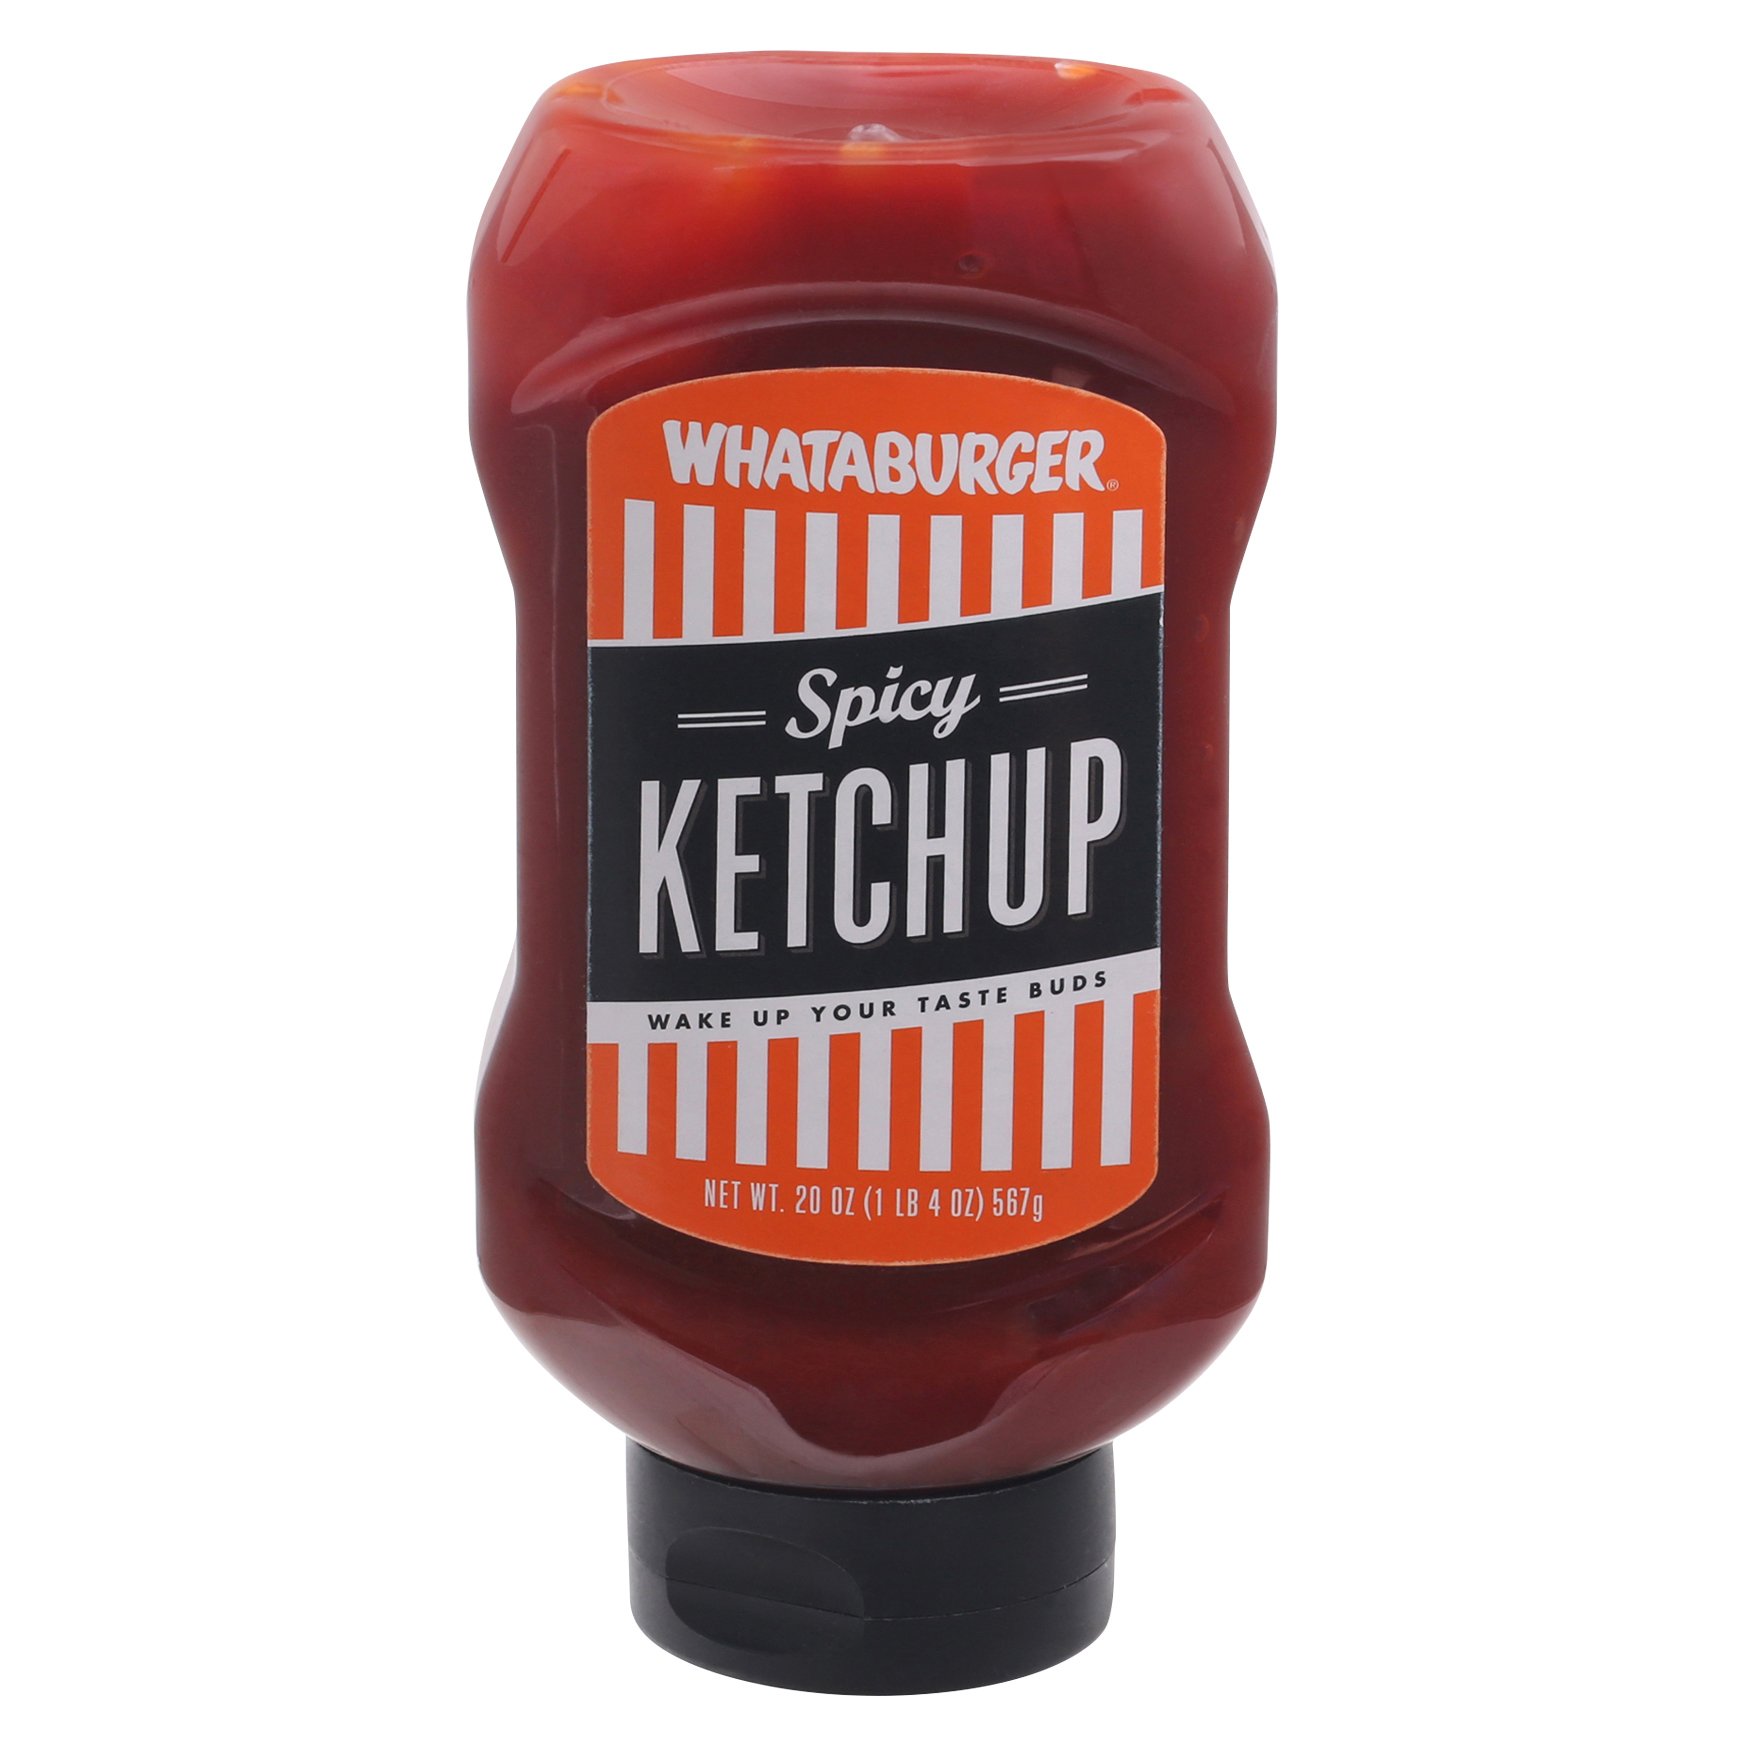 Whataburger Spicy Ketchup 20 oz | Shop Low Prices | Heb.com